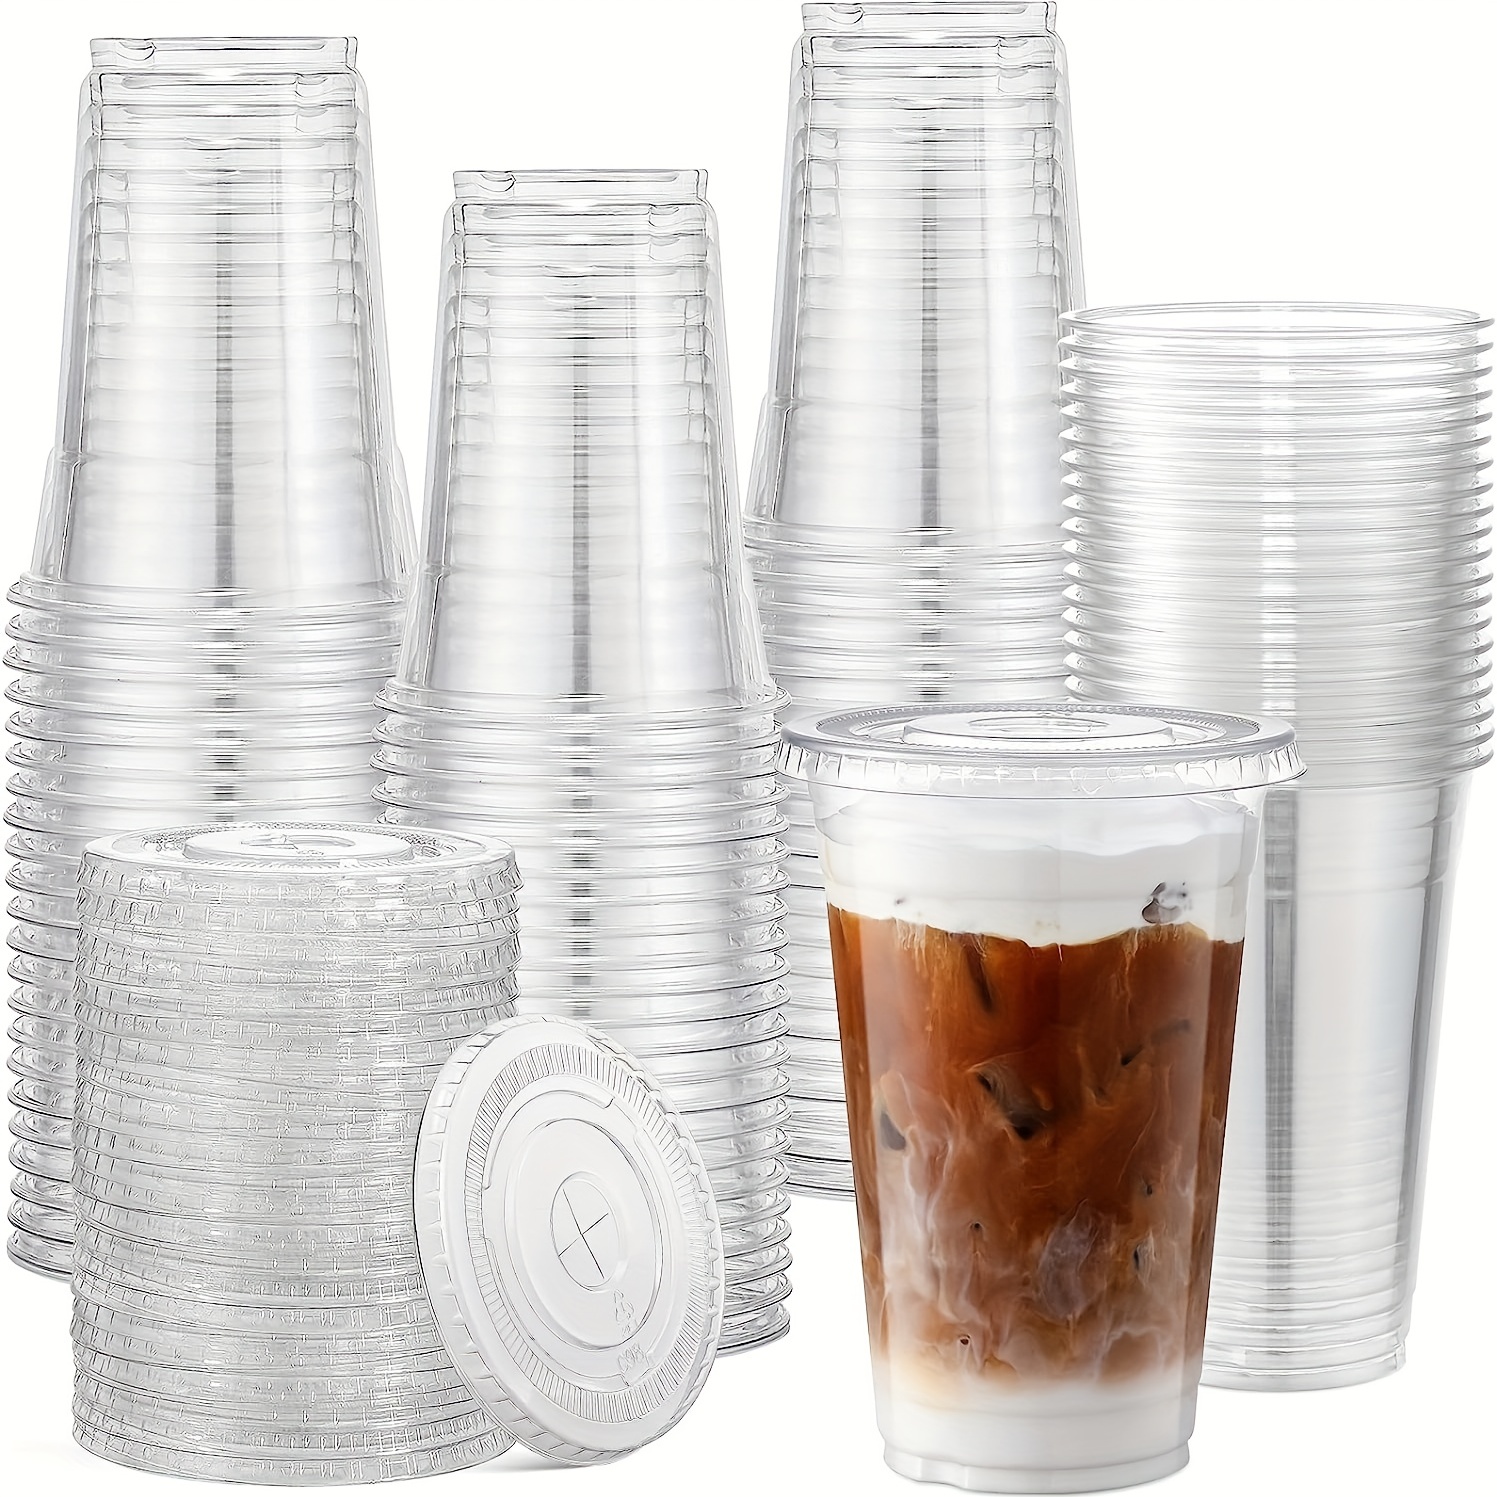 170ml 6 Oz Small Clear Plastic Water Cups / Small Disposable Cups